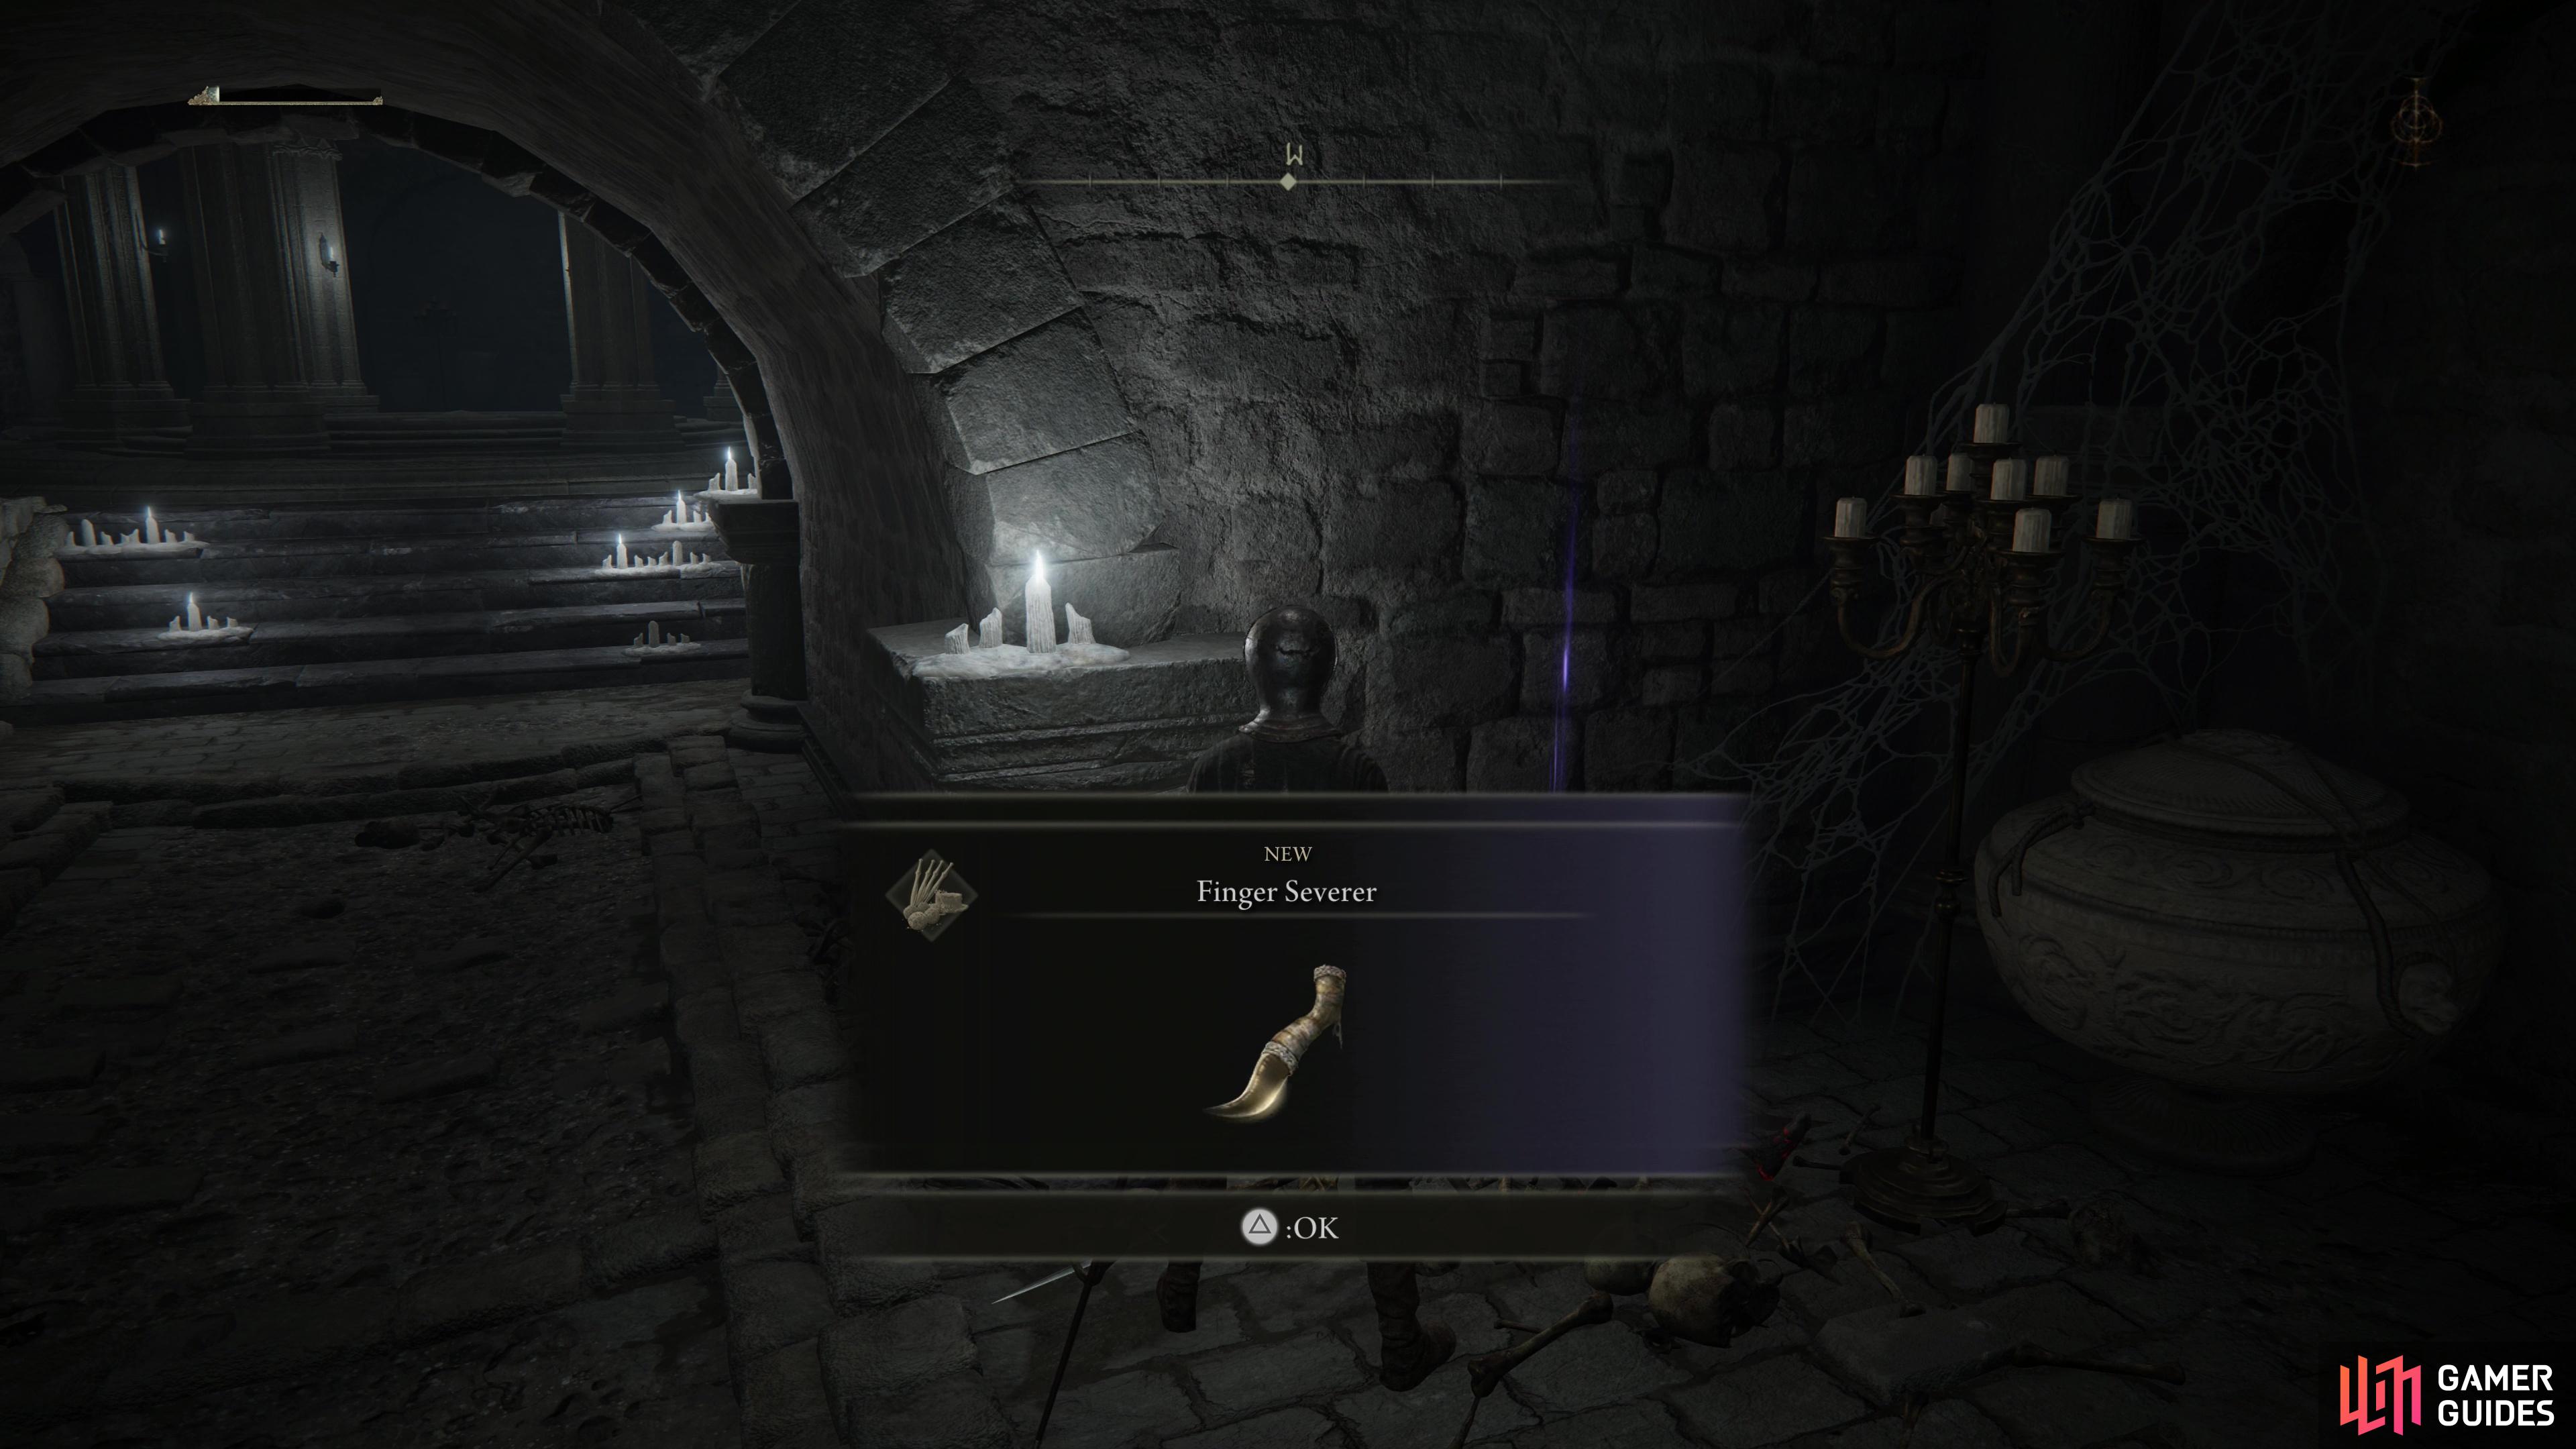 Leave the tutorial area and grab the Tarnished's Furled Finger and the Finger Serverer items.